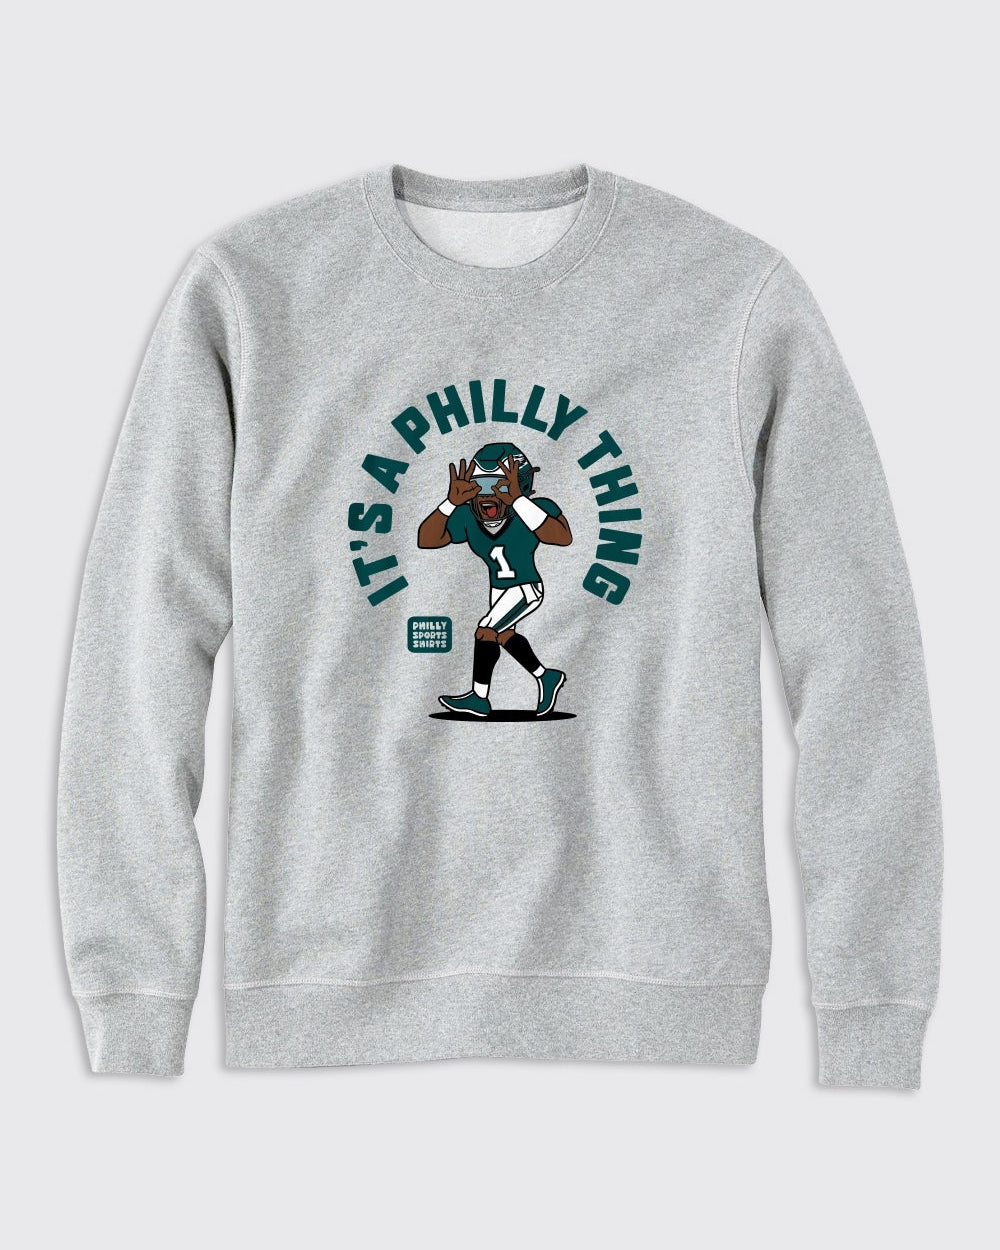 Official philadelphia eagles clothing merch store shop mitchell